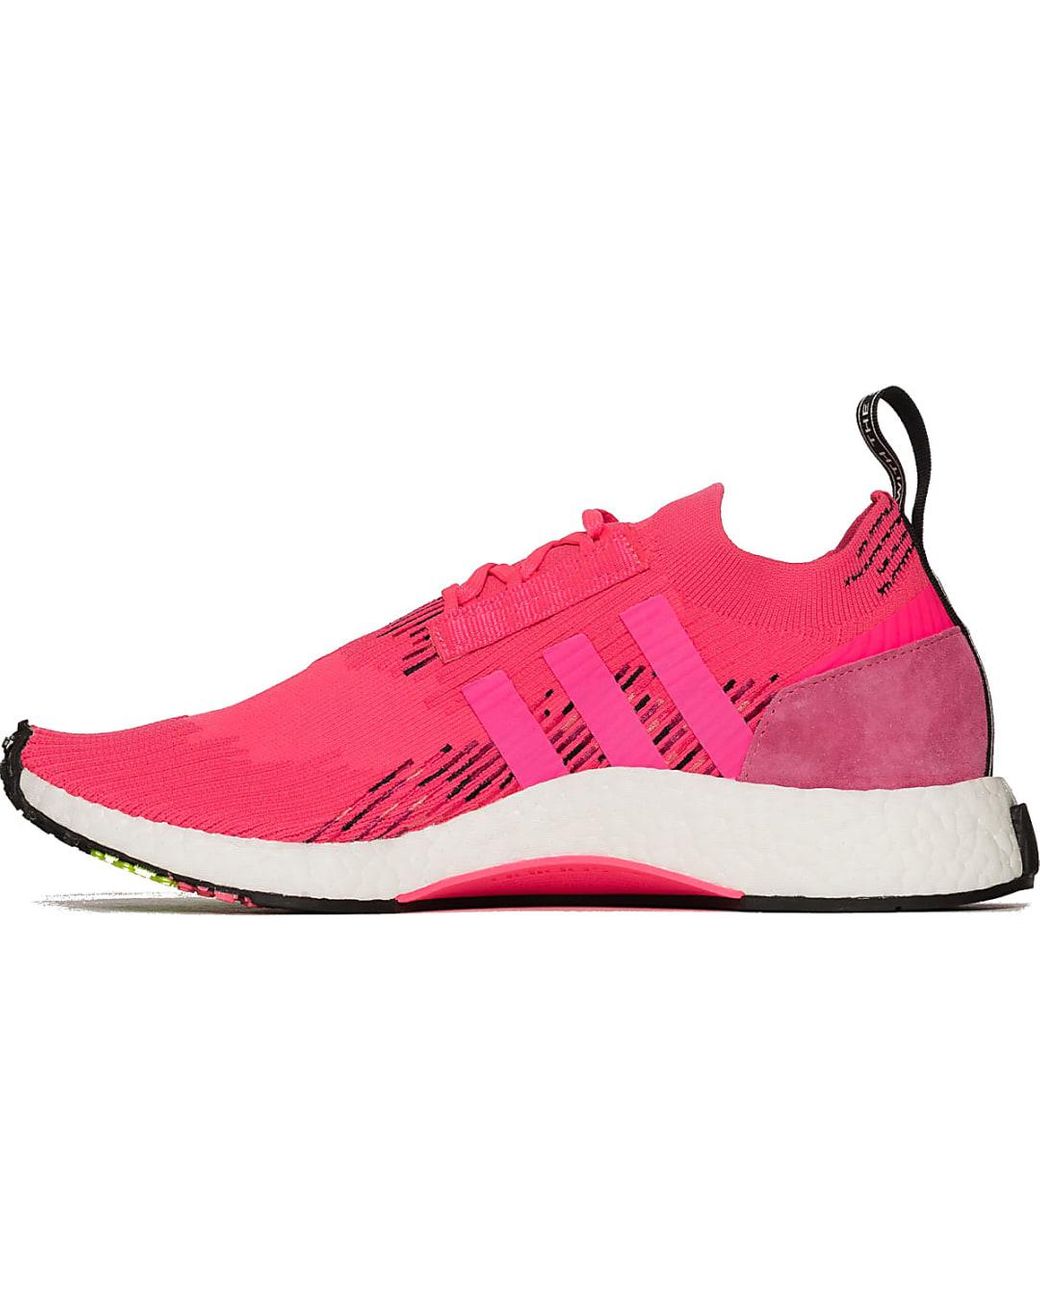 nmd_racer primeknit shoes pink